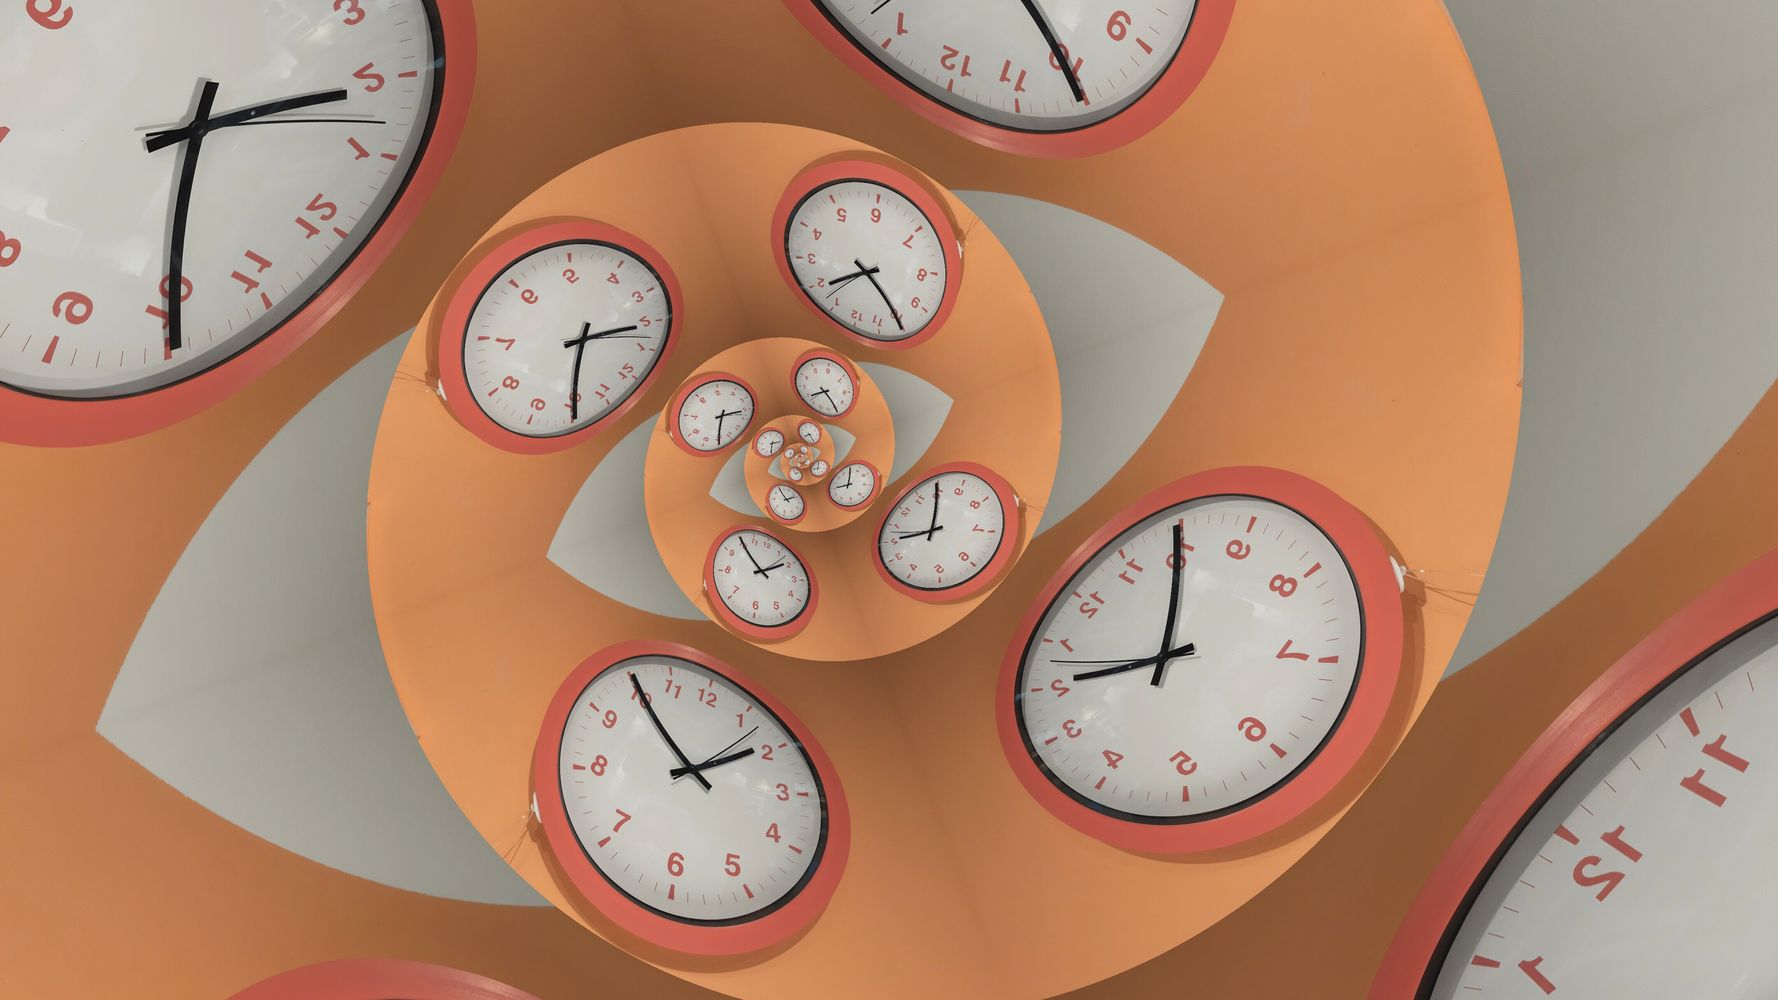 The Pandemic Warped Our Sense Of Time. Here's How To Gain It Back.